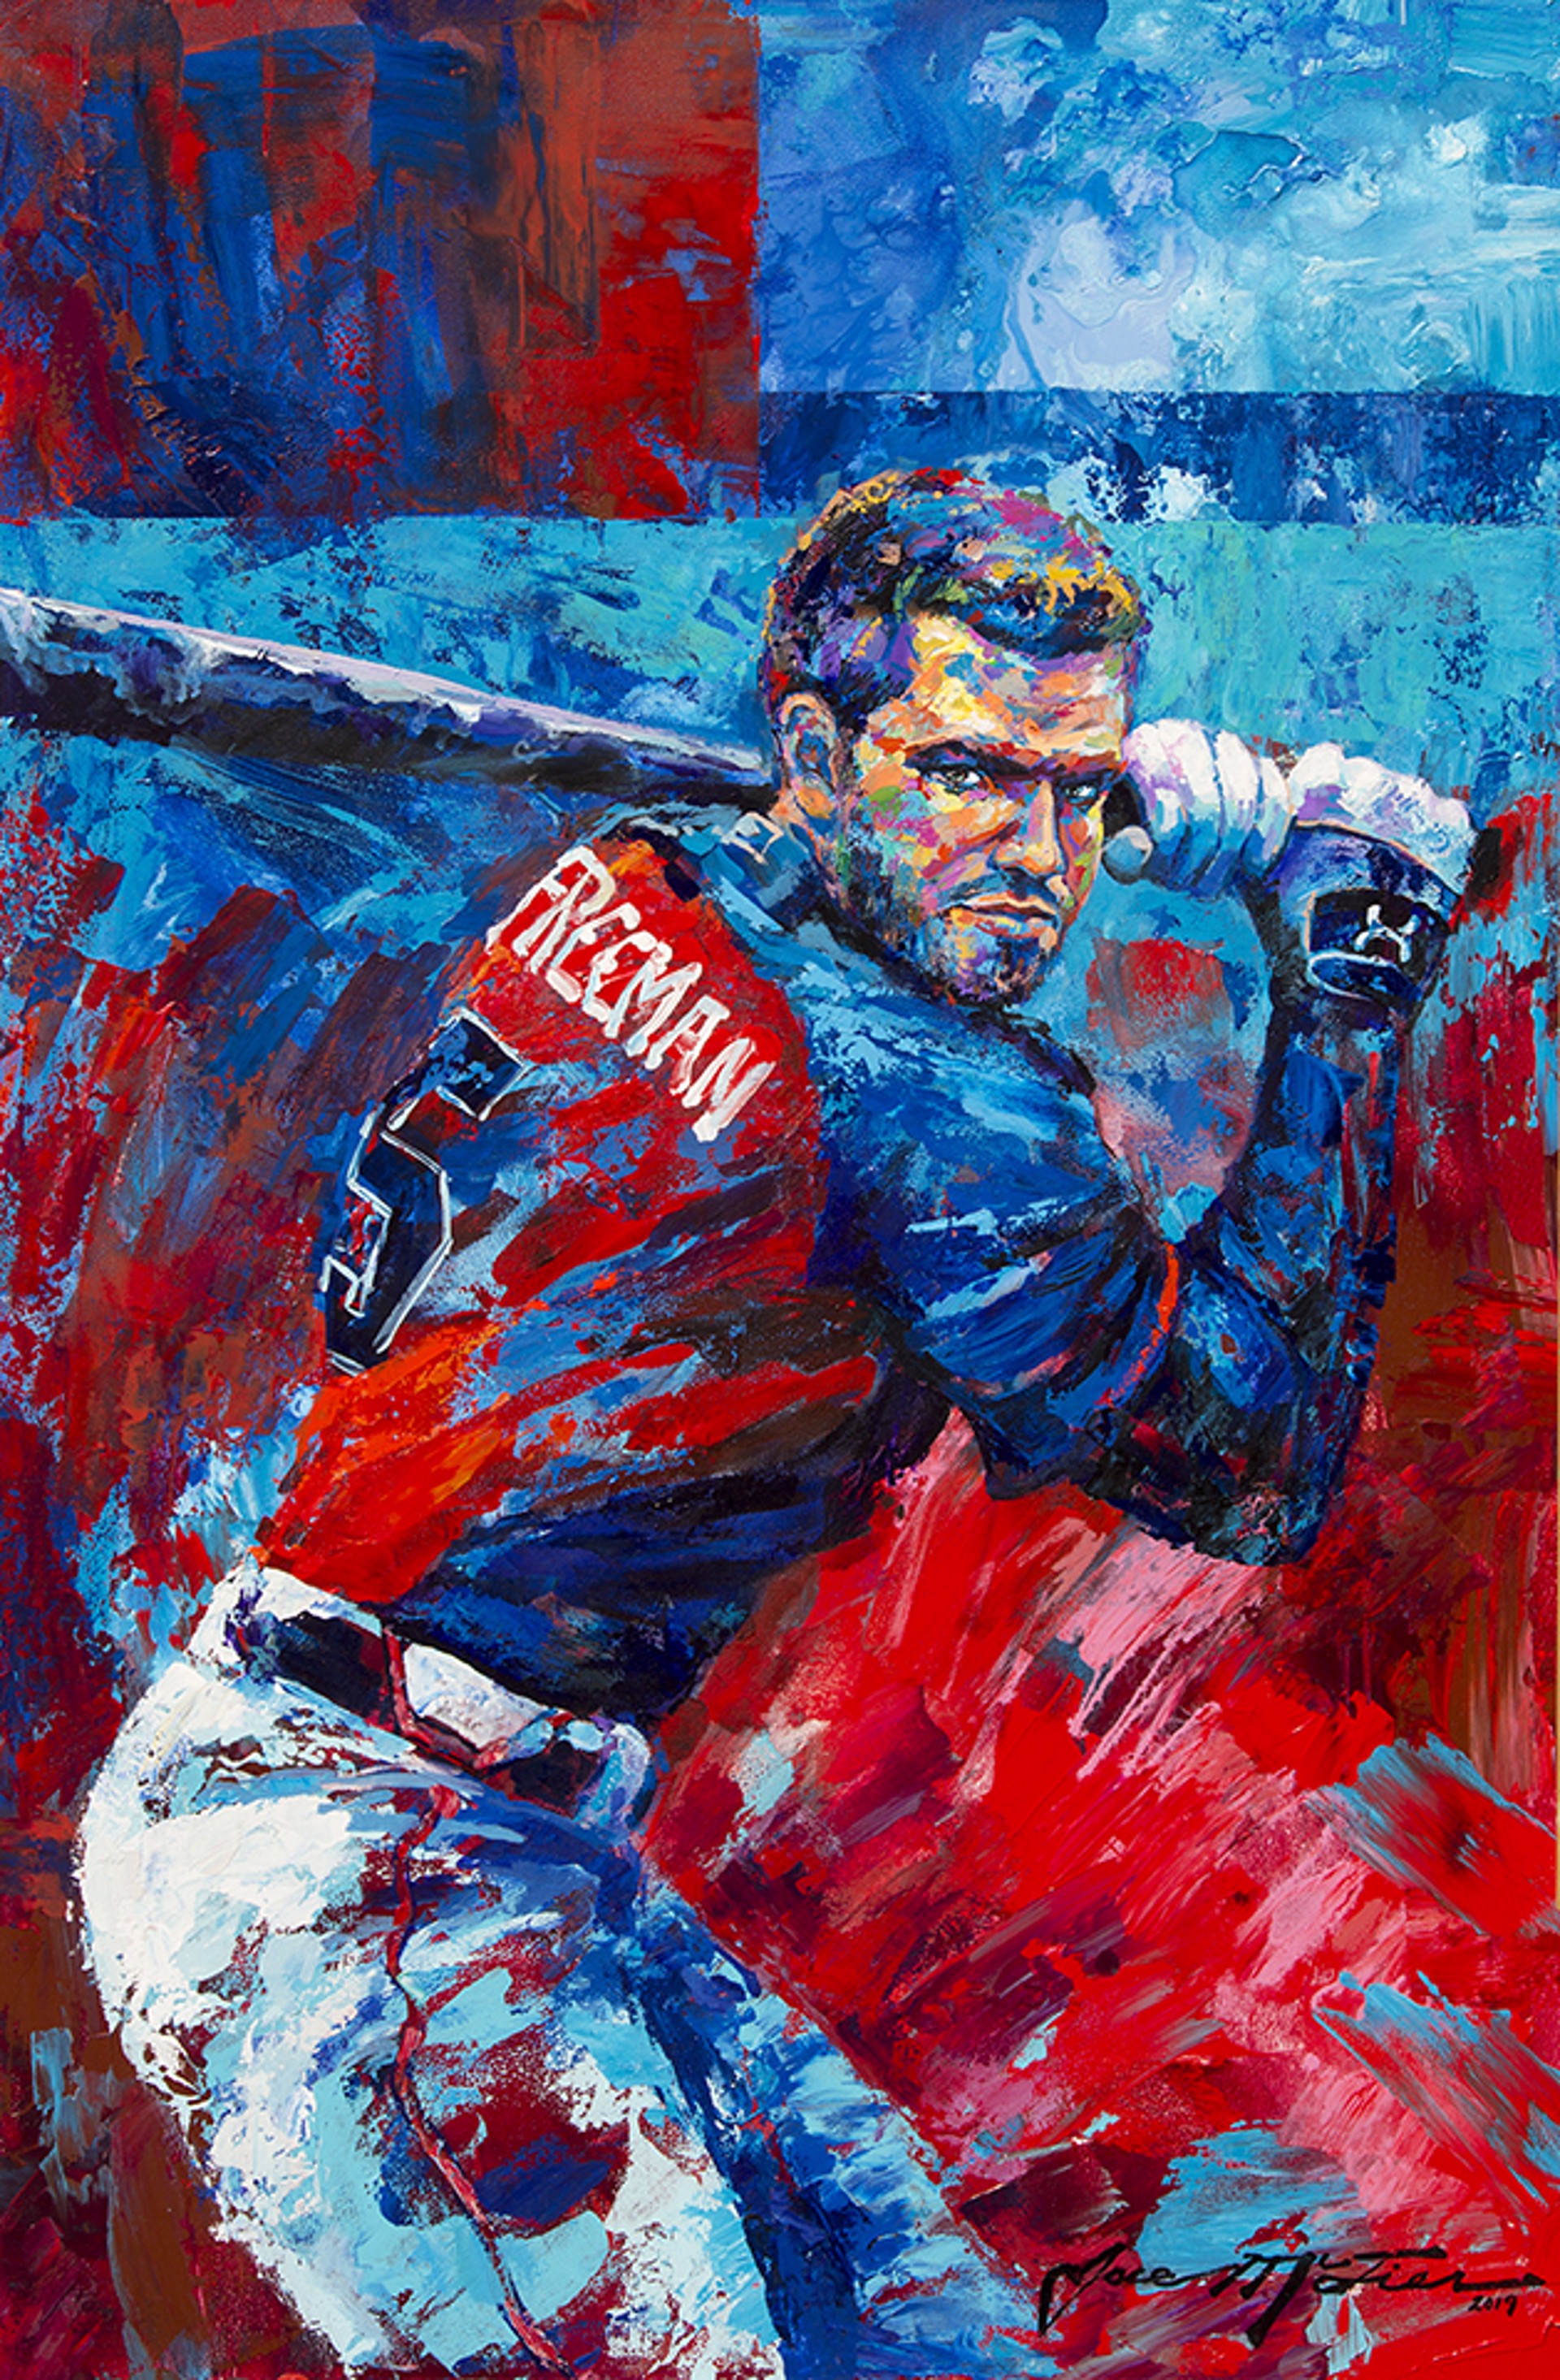 "The Process" - Freddie Freeman by Jace McTier